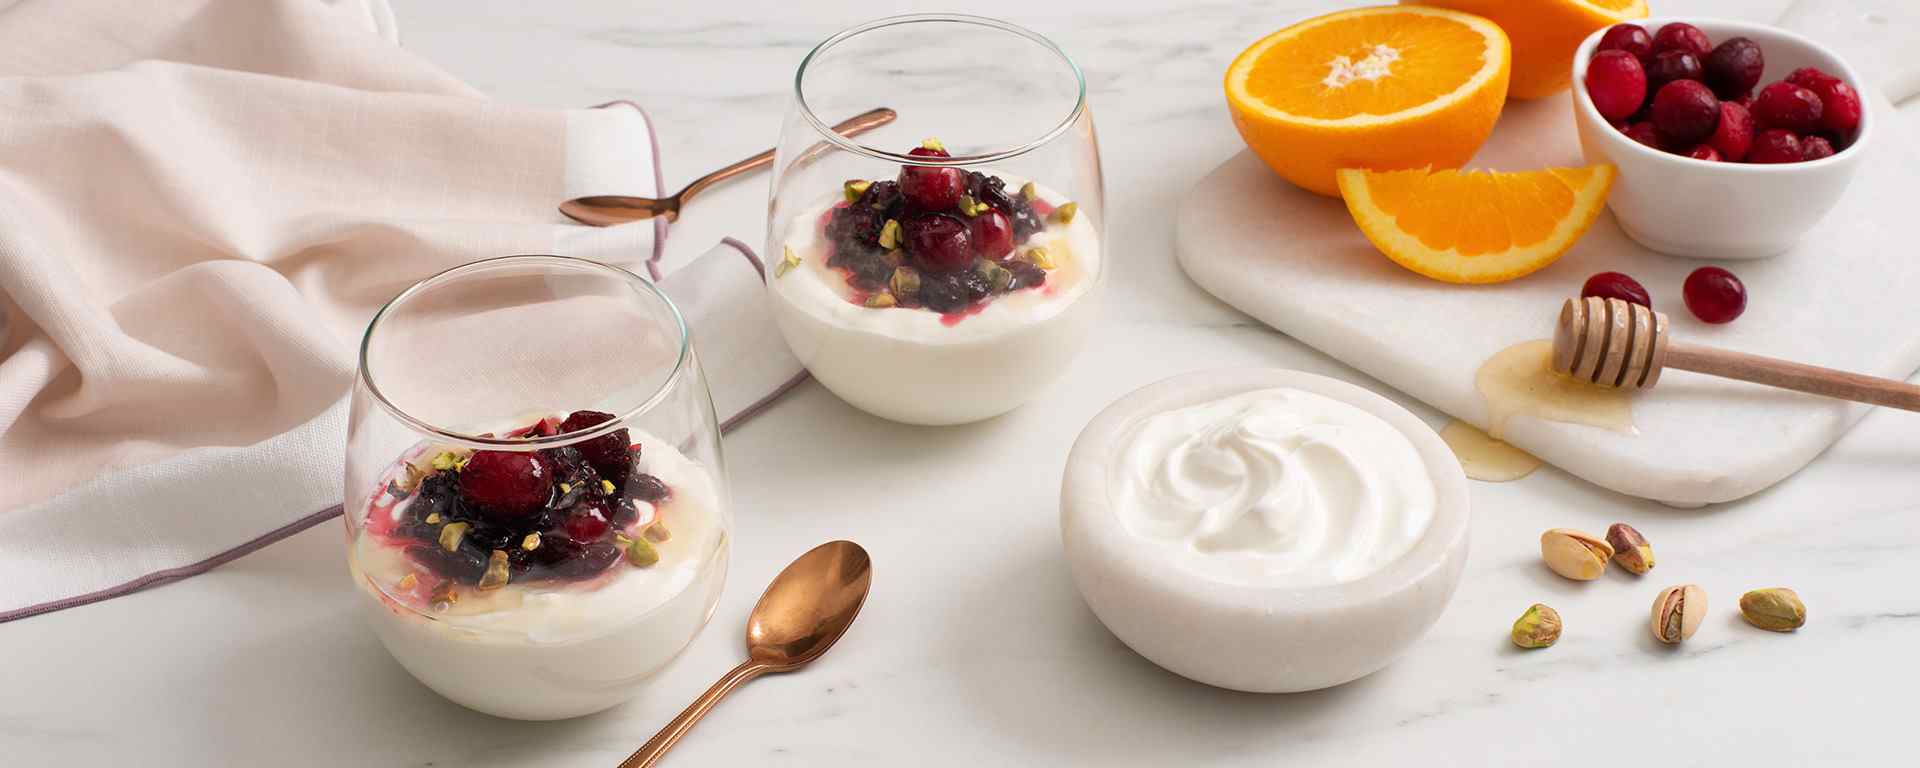 Photo for - Goat Cheese Mousse